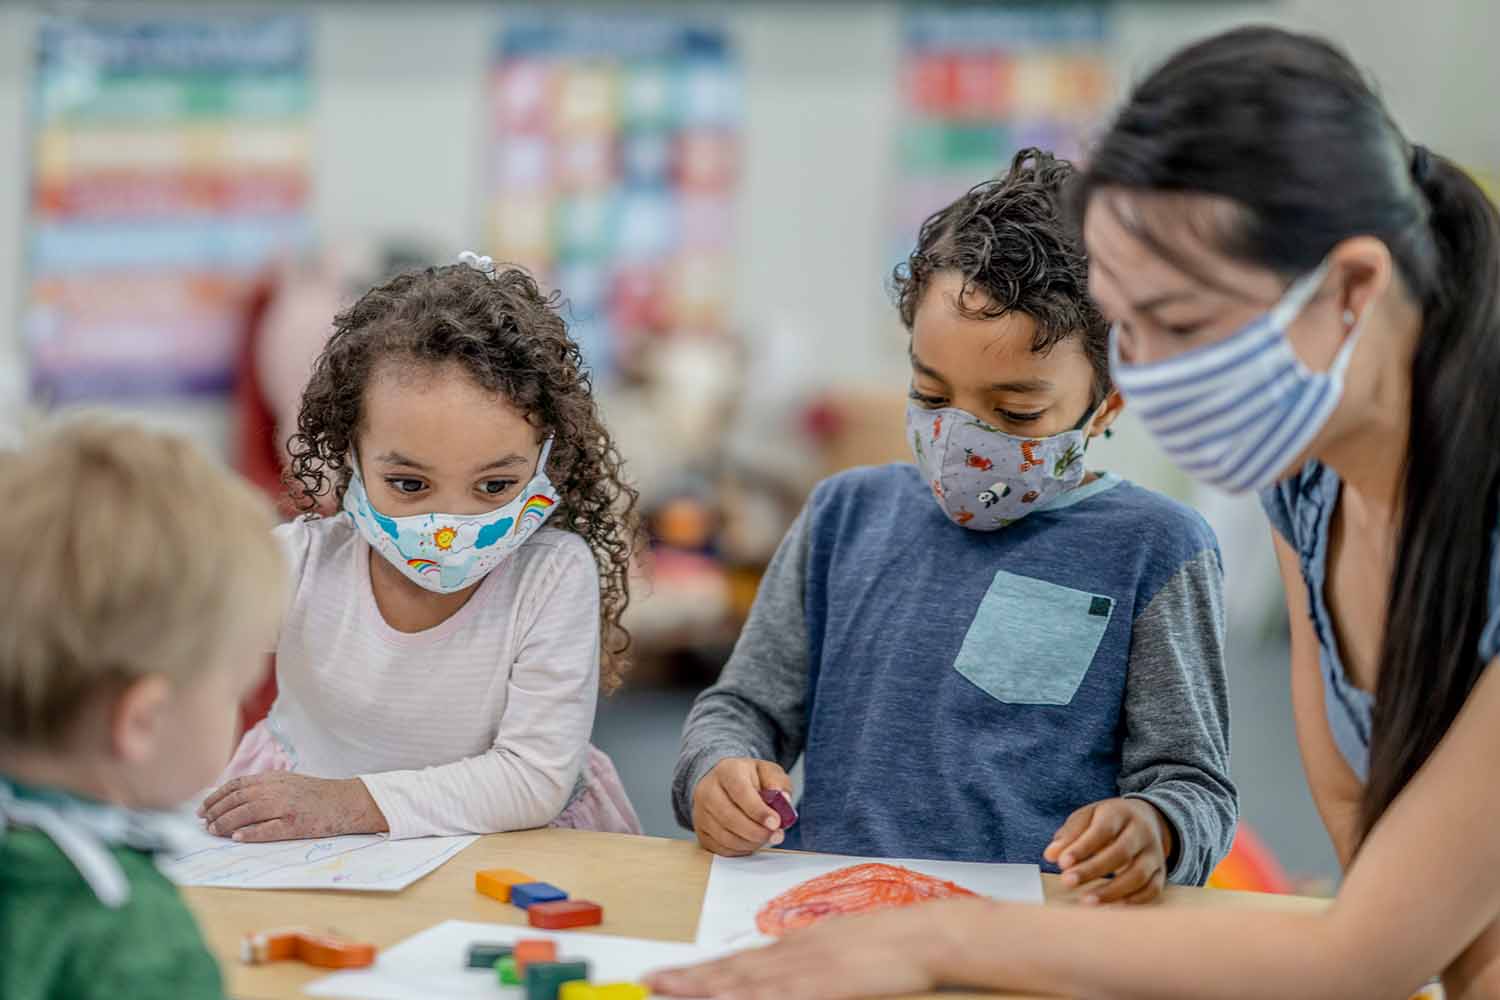 Multi-ethnic group of children and childcare worker colouring at a table while wearing protective face masks to avoid the transfer of germs.